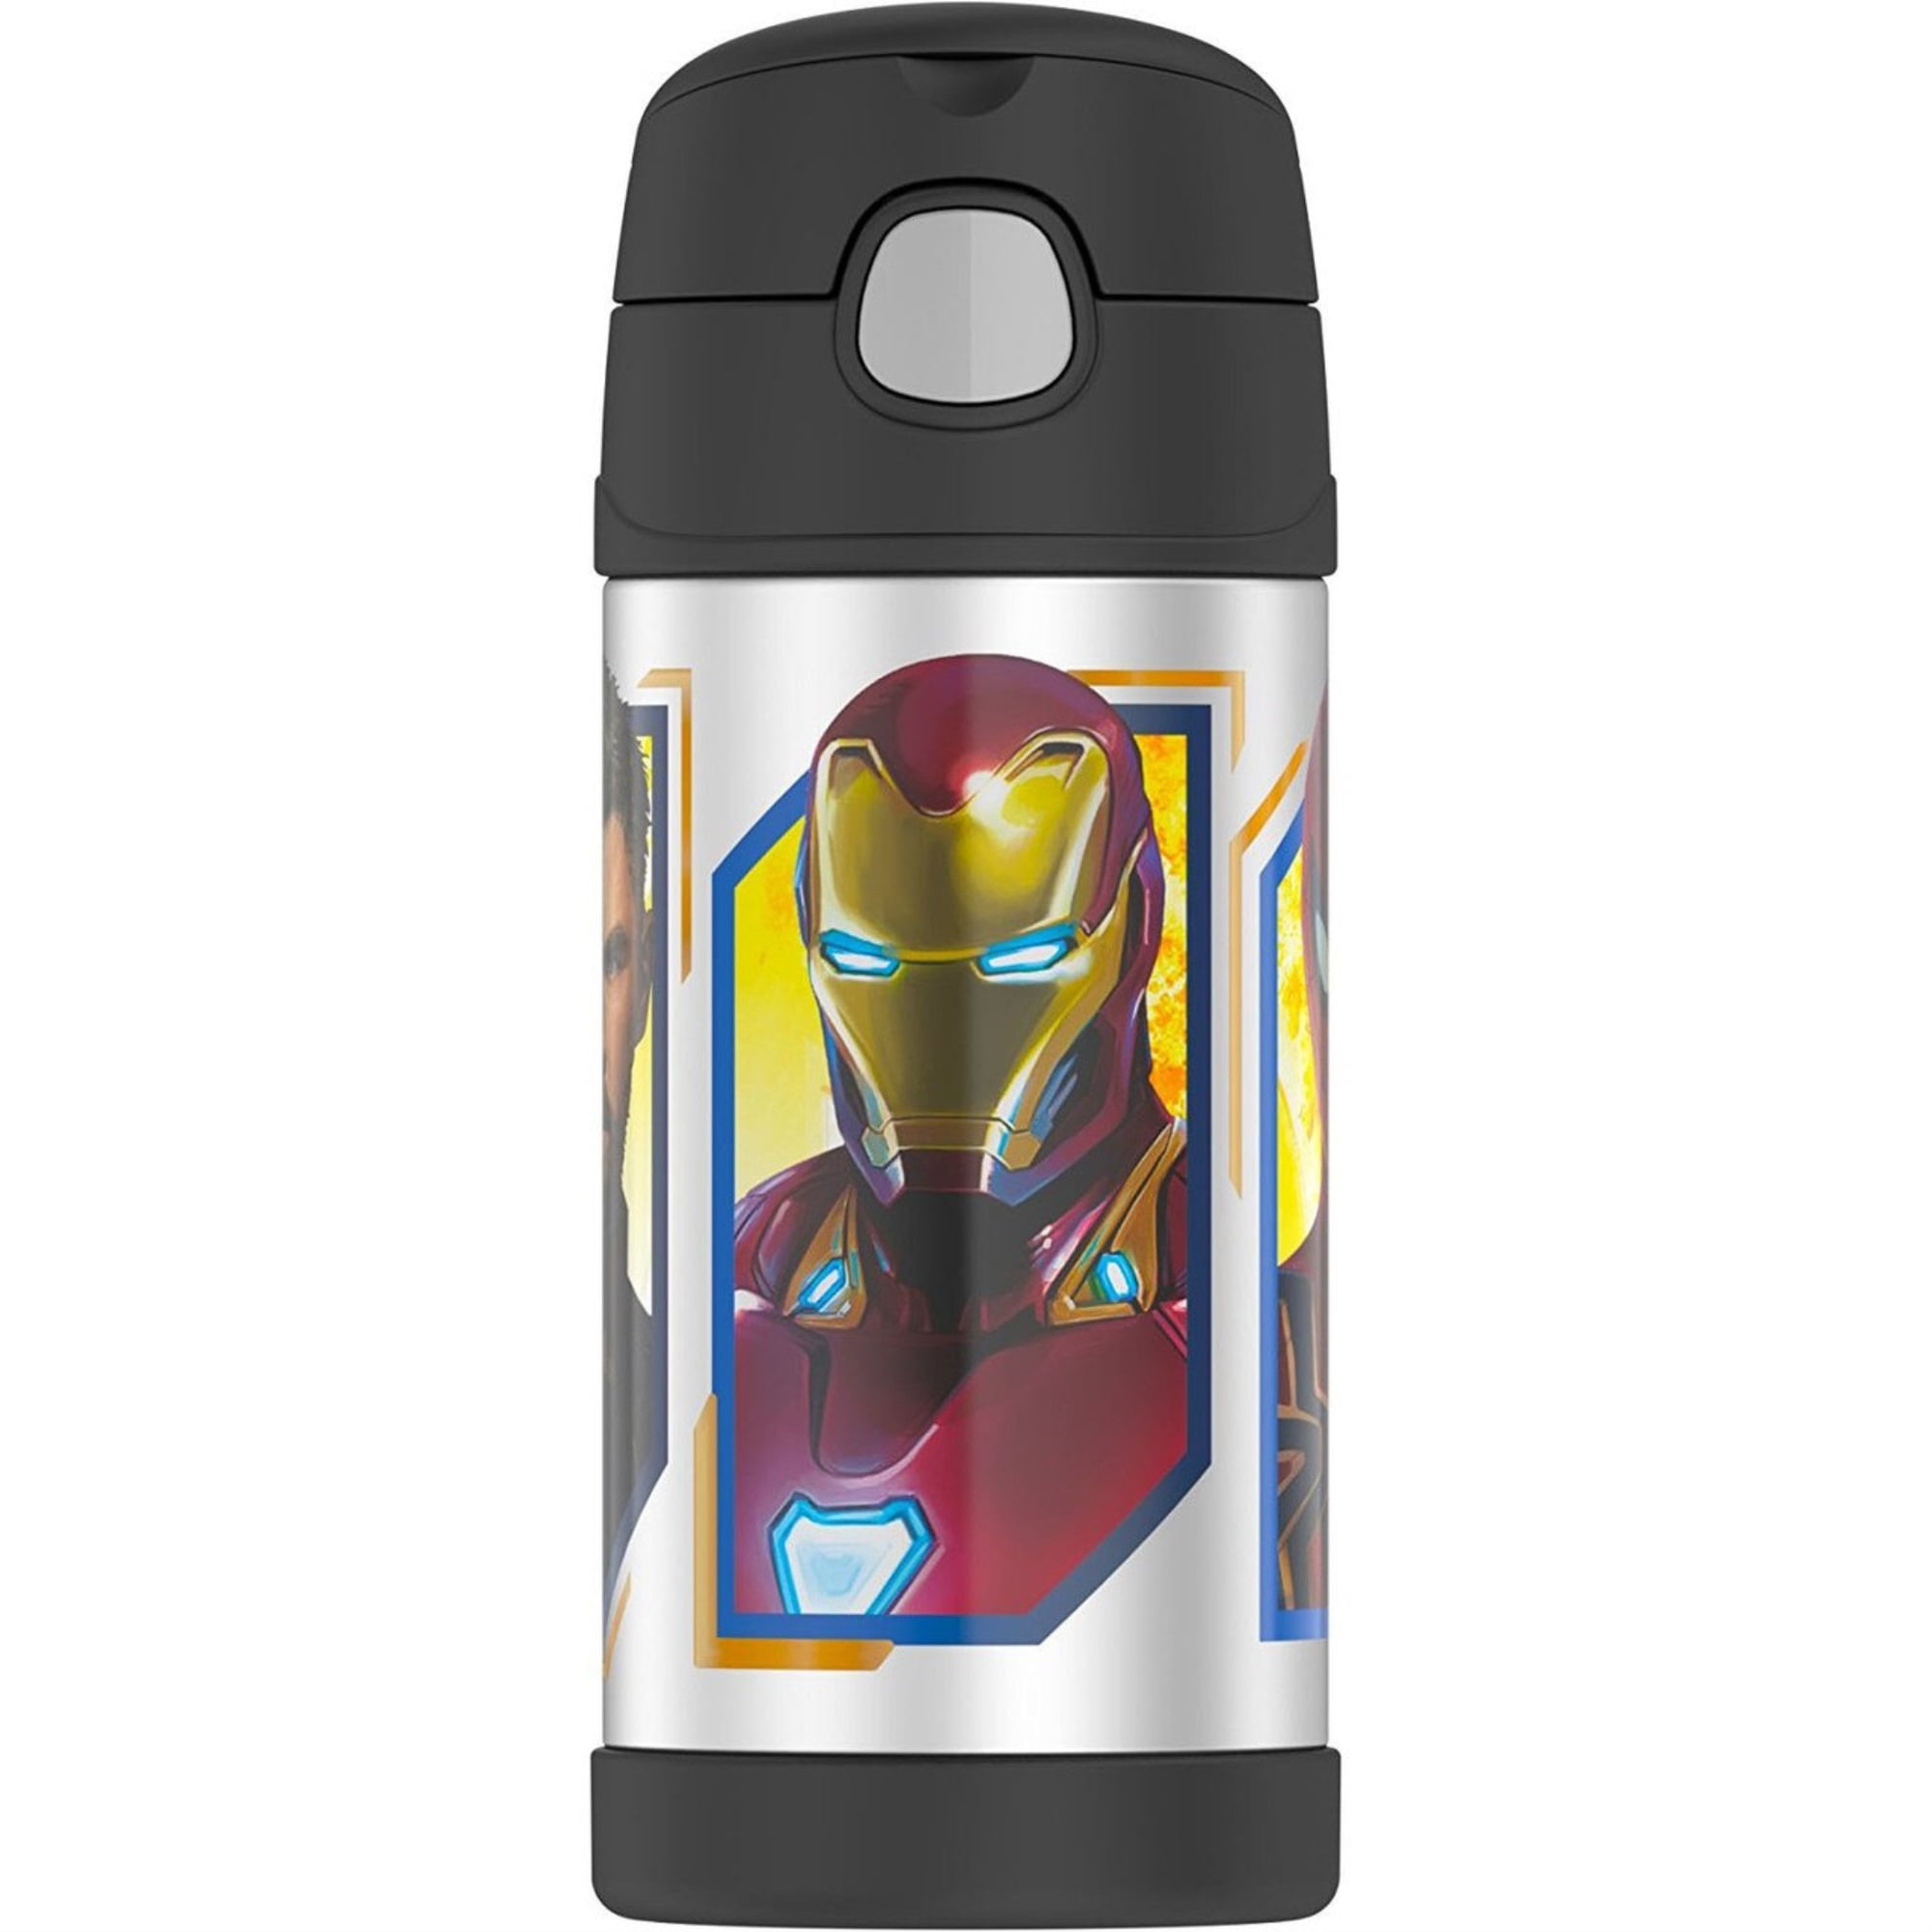 Thermos Funtainer 12 Ounce Stainless Steel Vacuum Insulated Kids Straw Bottle, Avengers